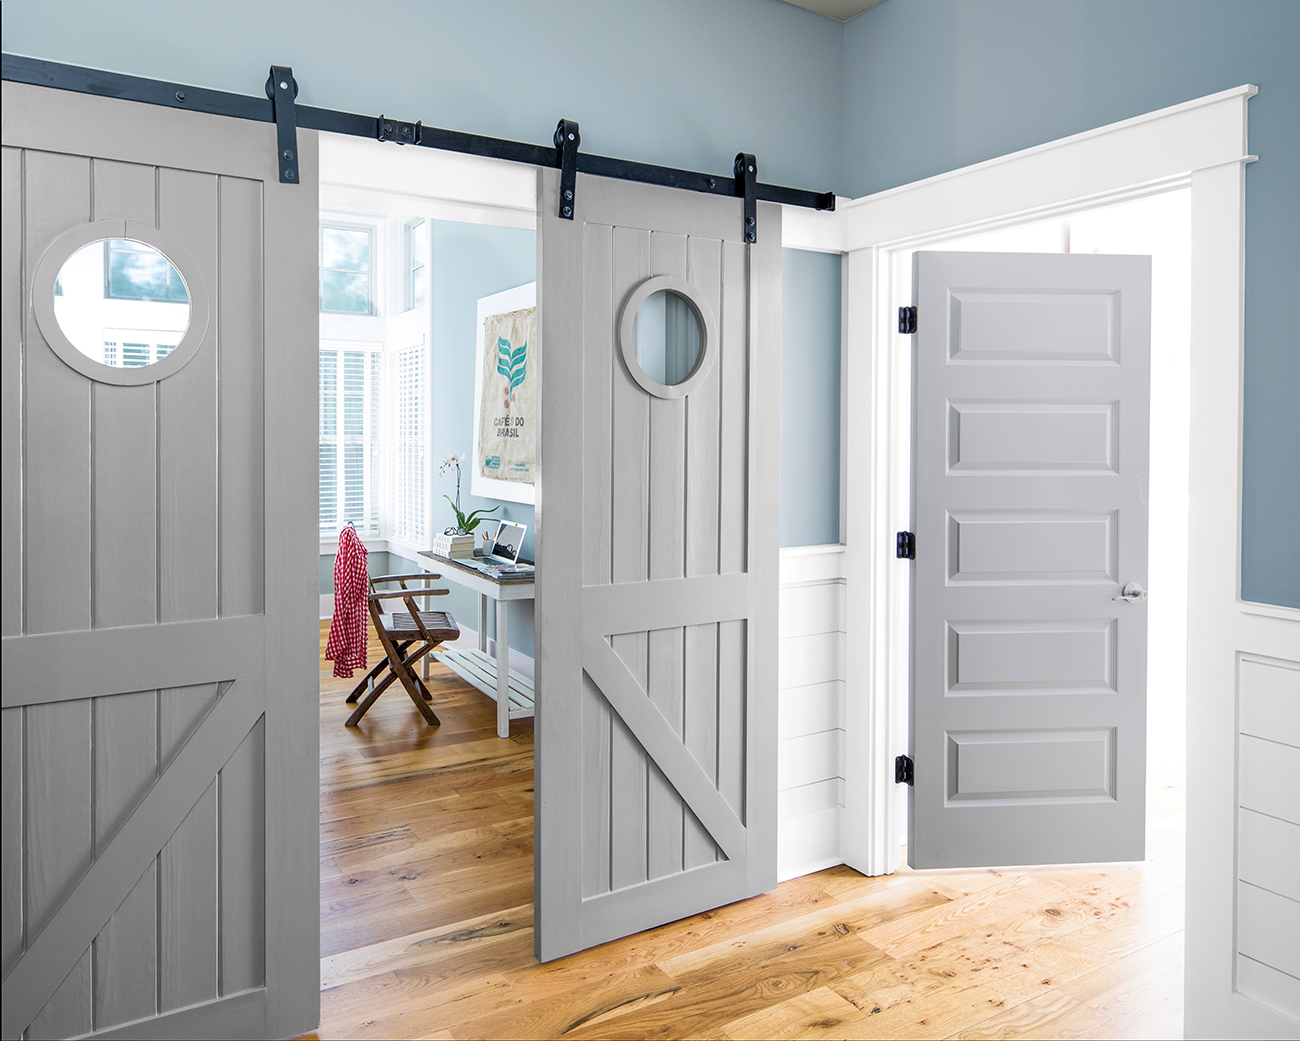 Doors painted in ADVANCE Interior Paint in Storm AF-700, Satin finish; Walls: Nimbus Gray 2131-50, Regal Select, Matte; Trim: Pure White OC-64, Regal® Select, Pearl